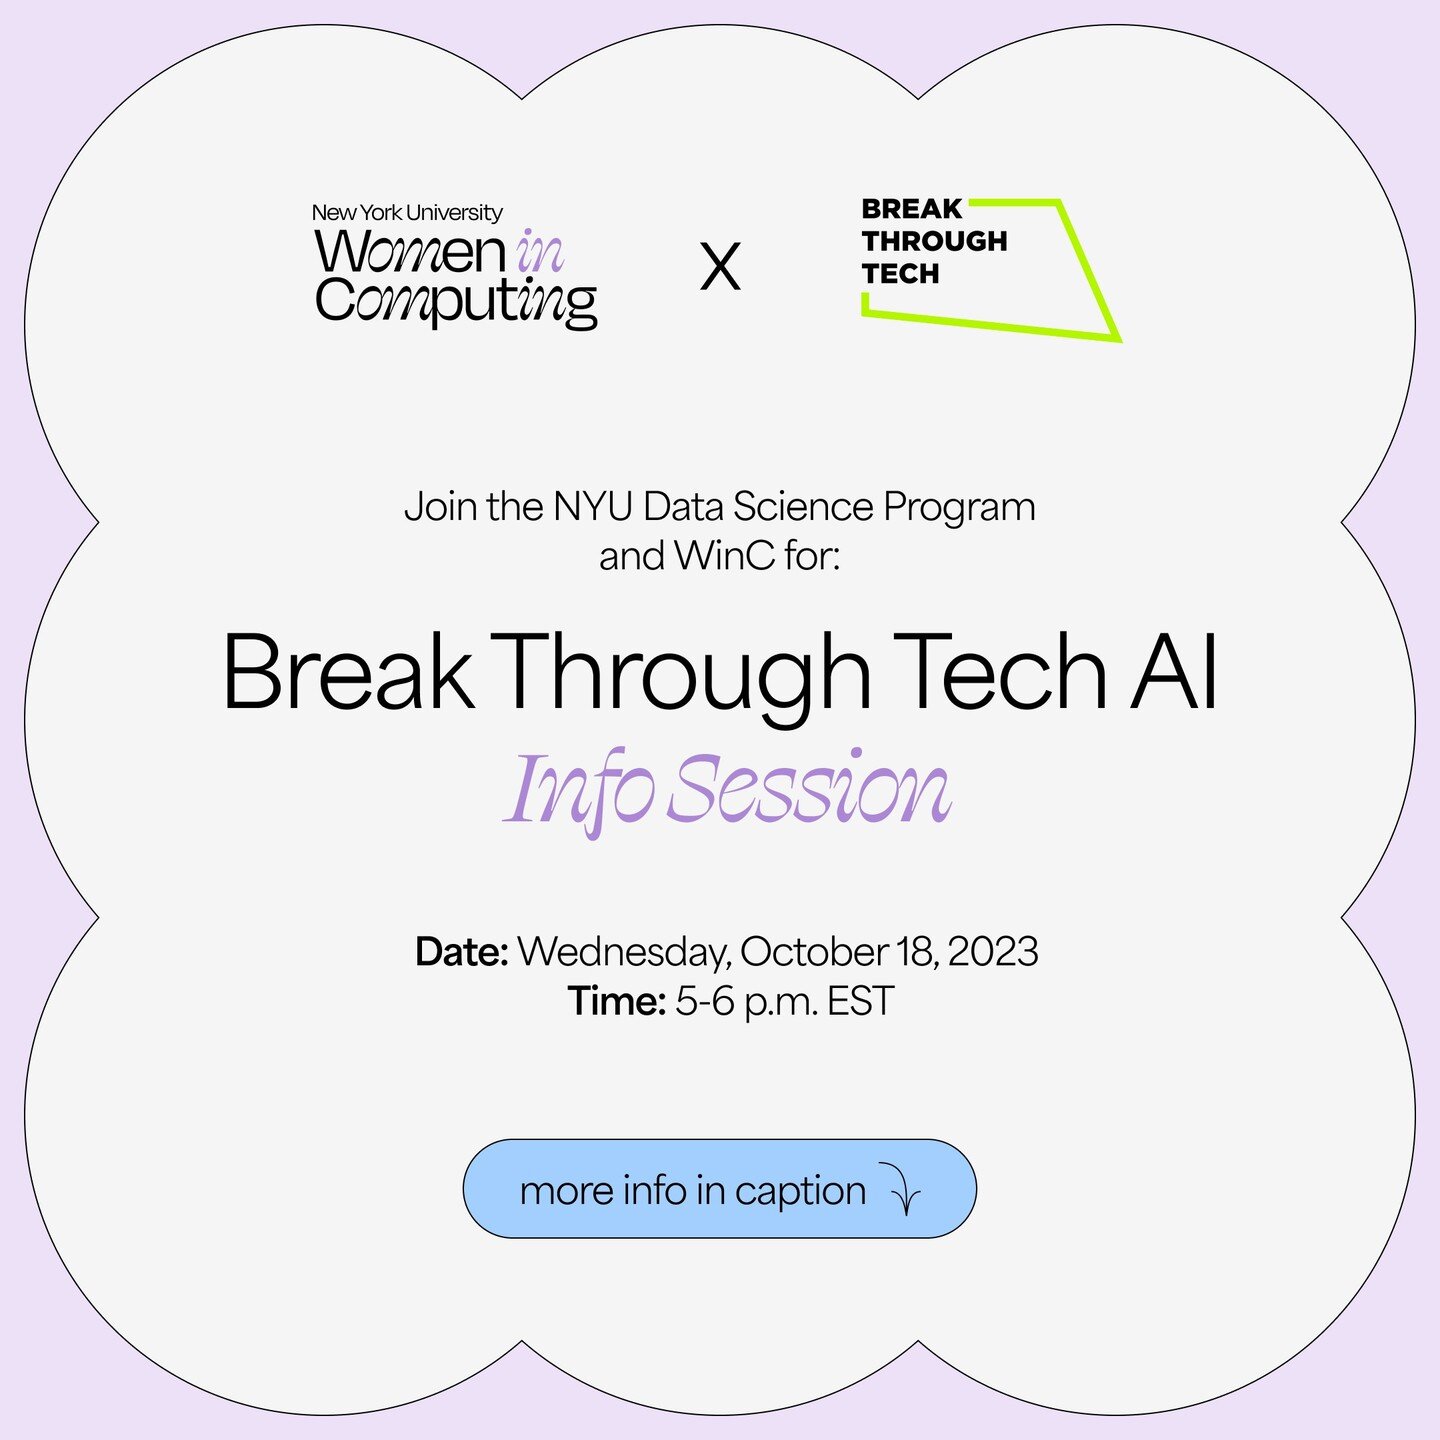 Join the NYU Data Science Program for an Information Session on Break Through Tech AI, a free, 1-year extracurricular program that helps undergraduate college women (trans and cis), nonbinary, and other underrepresented groups in tech gain the skills